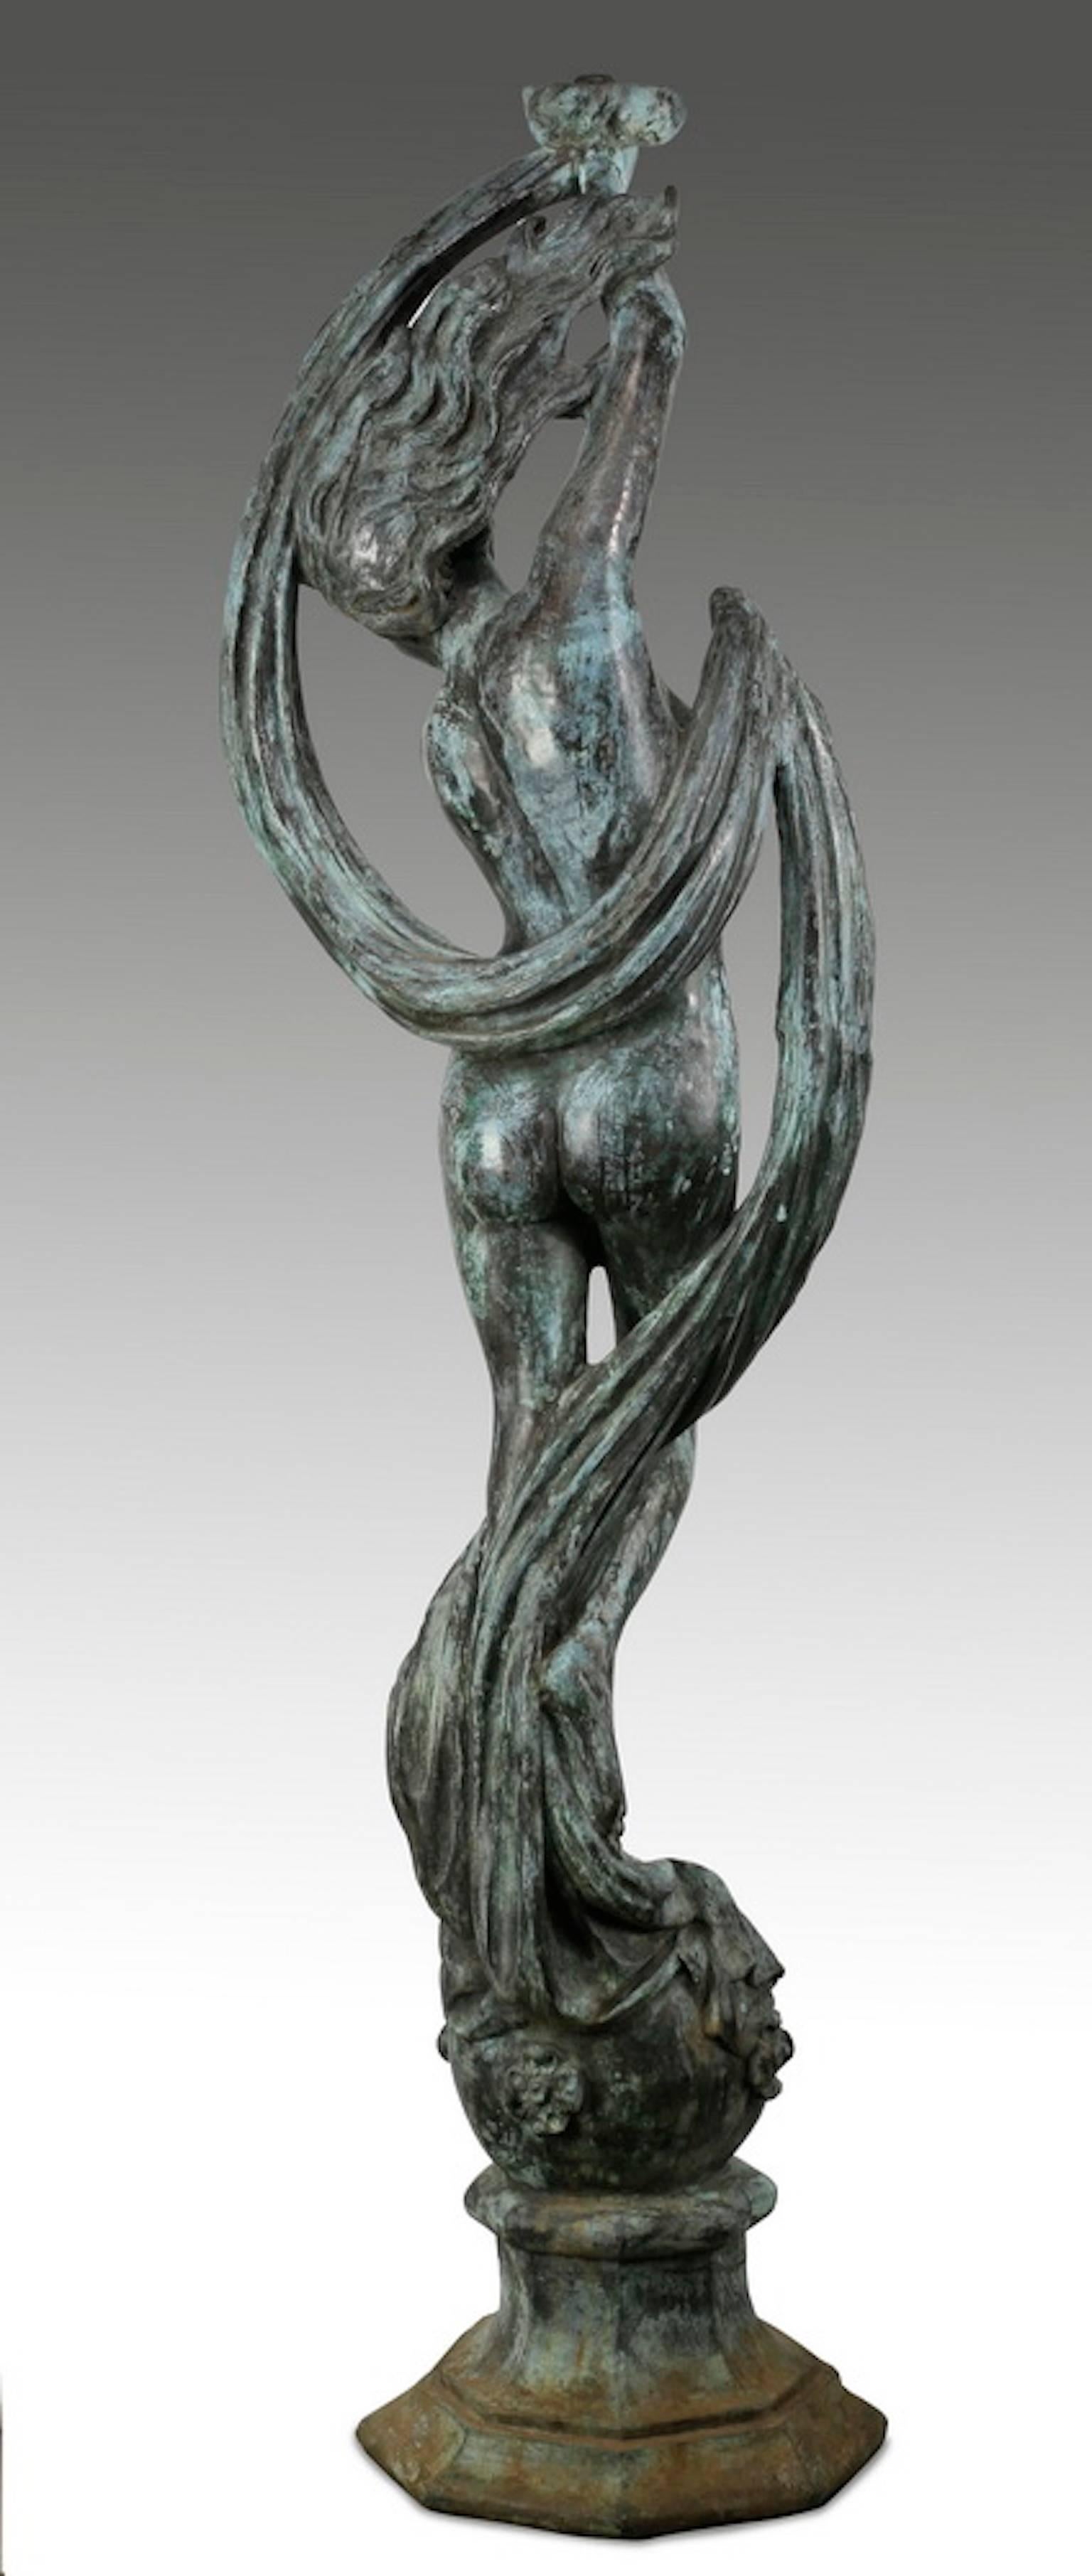 Bronze figural sculpture, in the style of Jean-Louis Gregoire (French 1840-1890), depicting a nude maiden standing on a ball with her arms raised above her head holding a sash, the whole resting on an octagon shaped base.